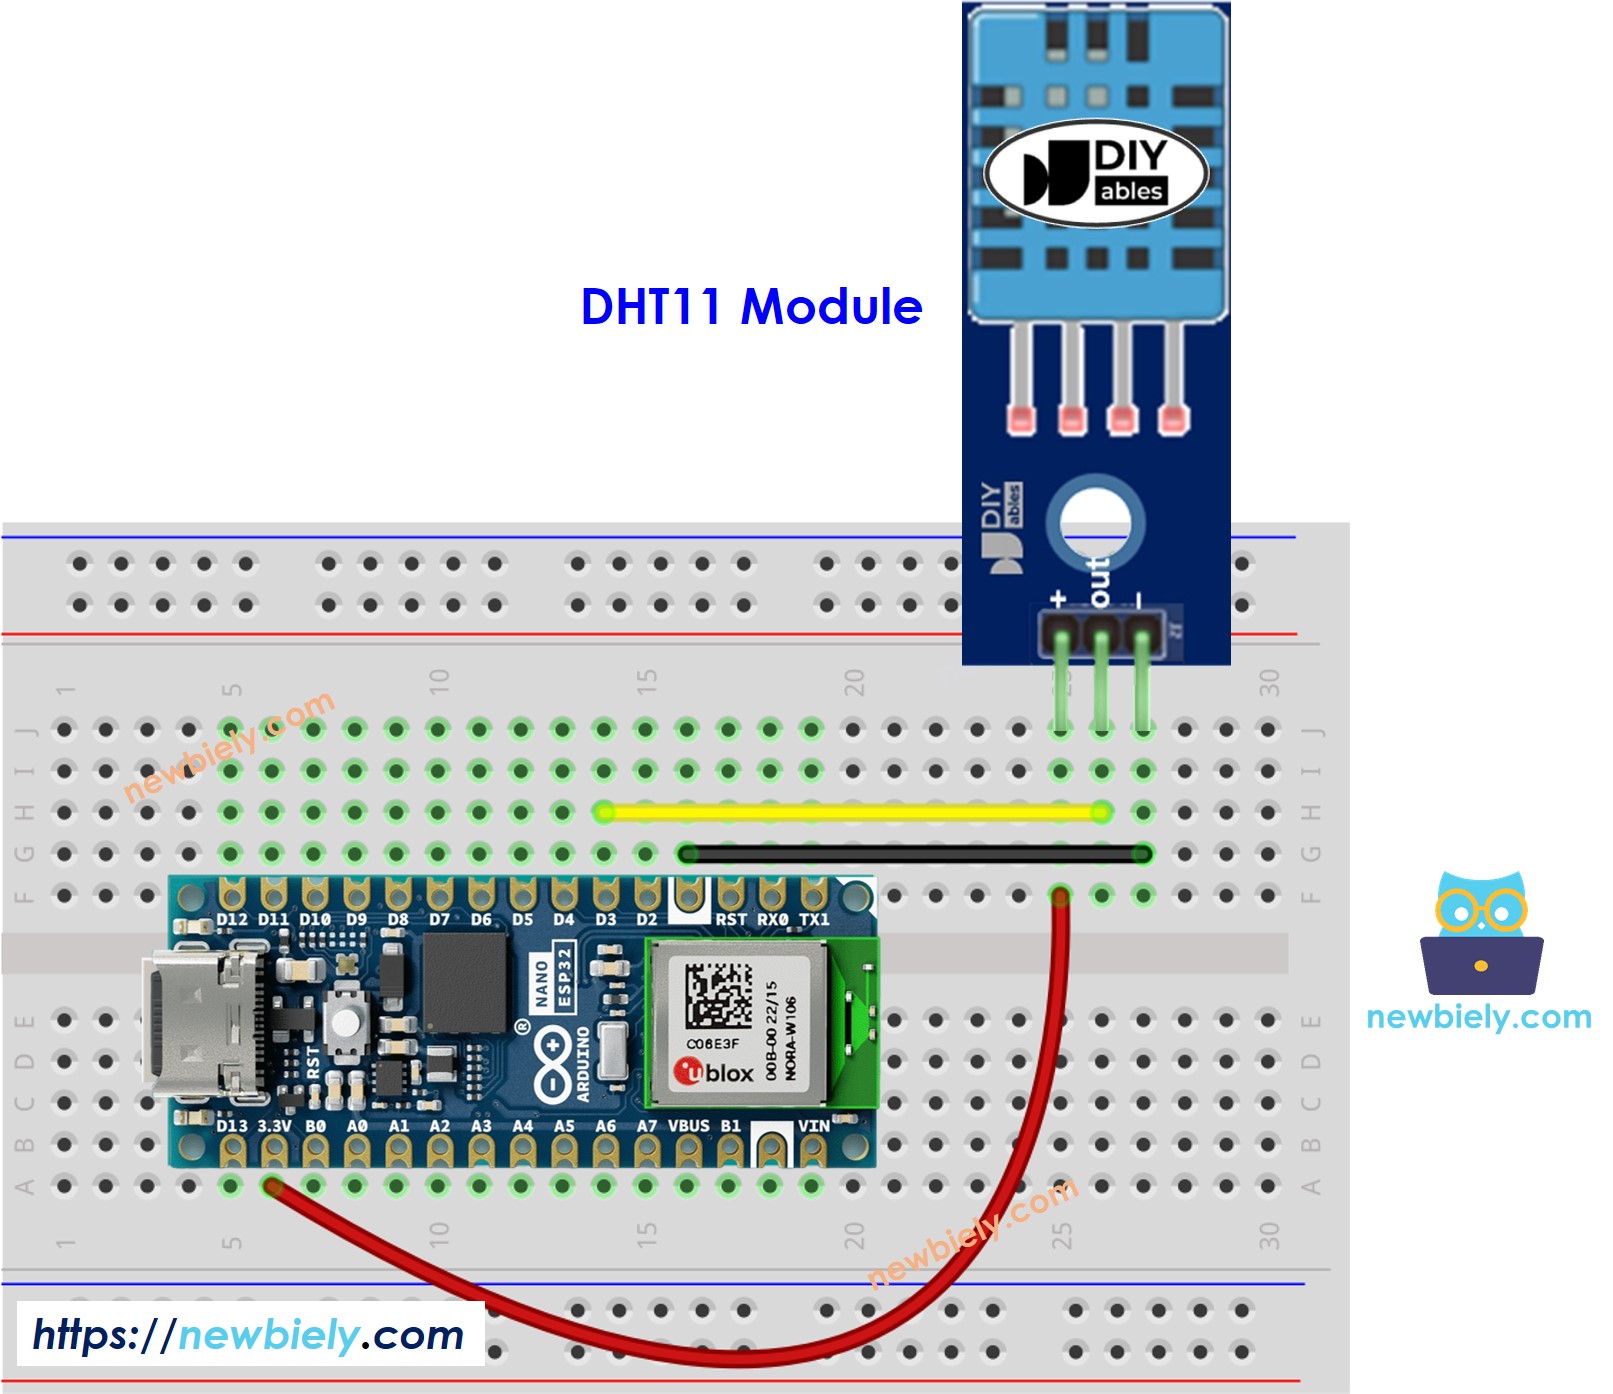 The wiring diagram between Arduino Nano ESP32 and DHT11 Temperature and humidity Module